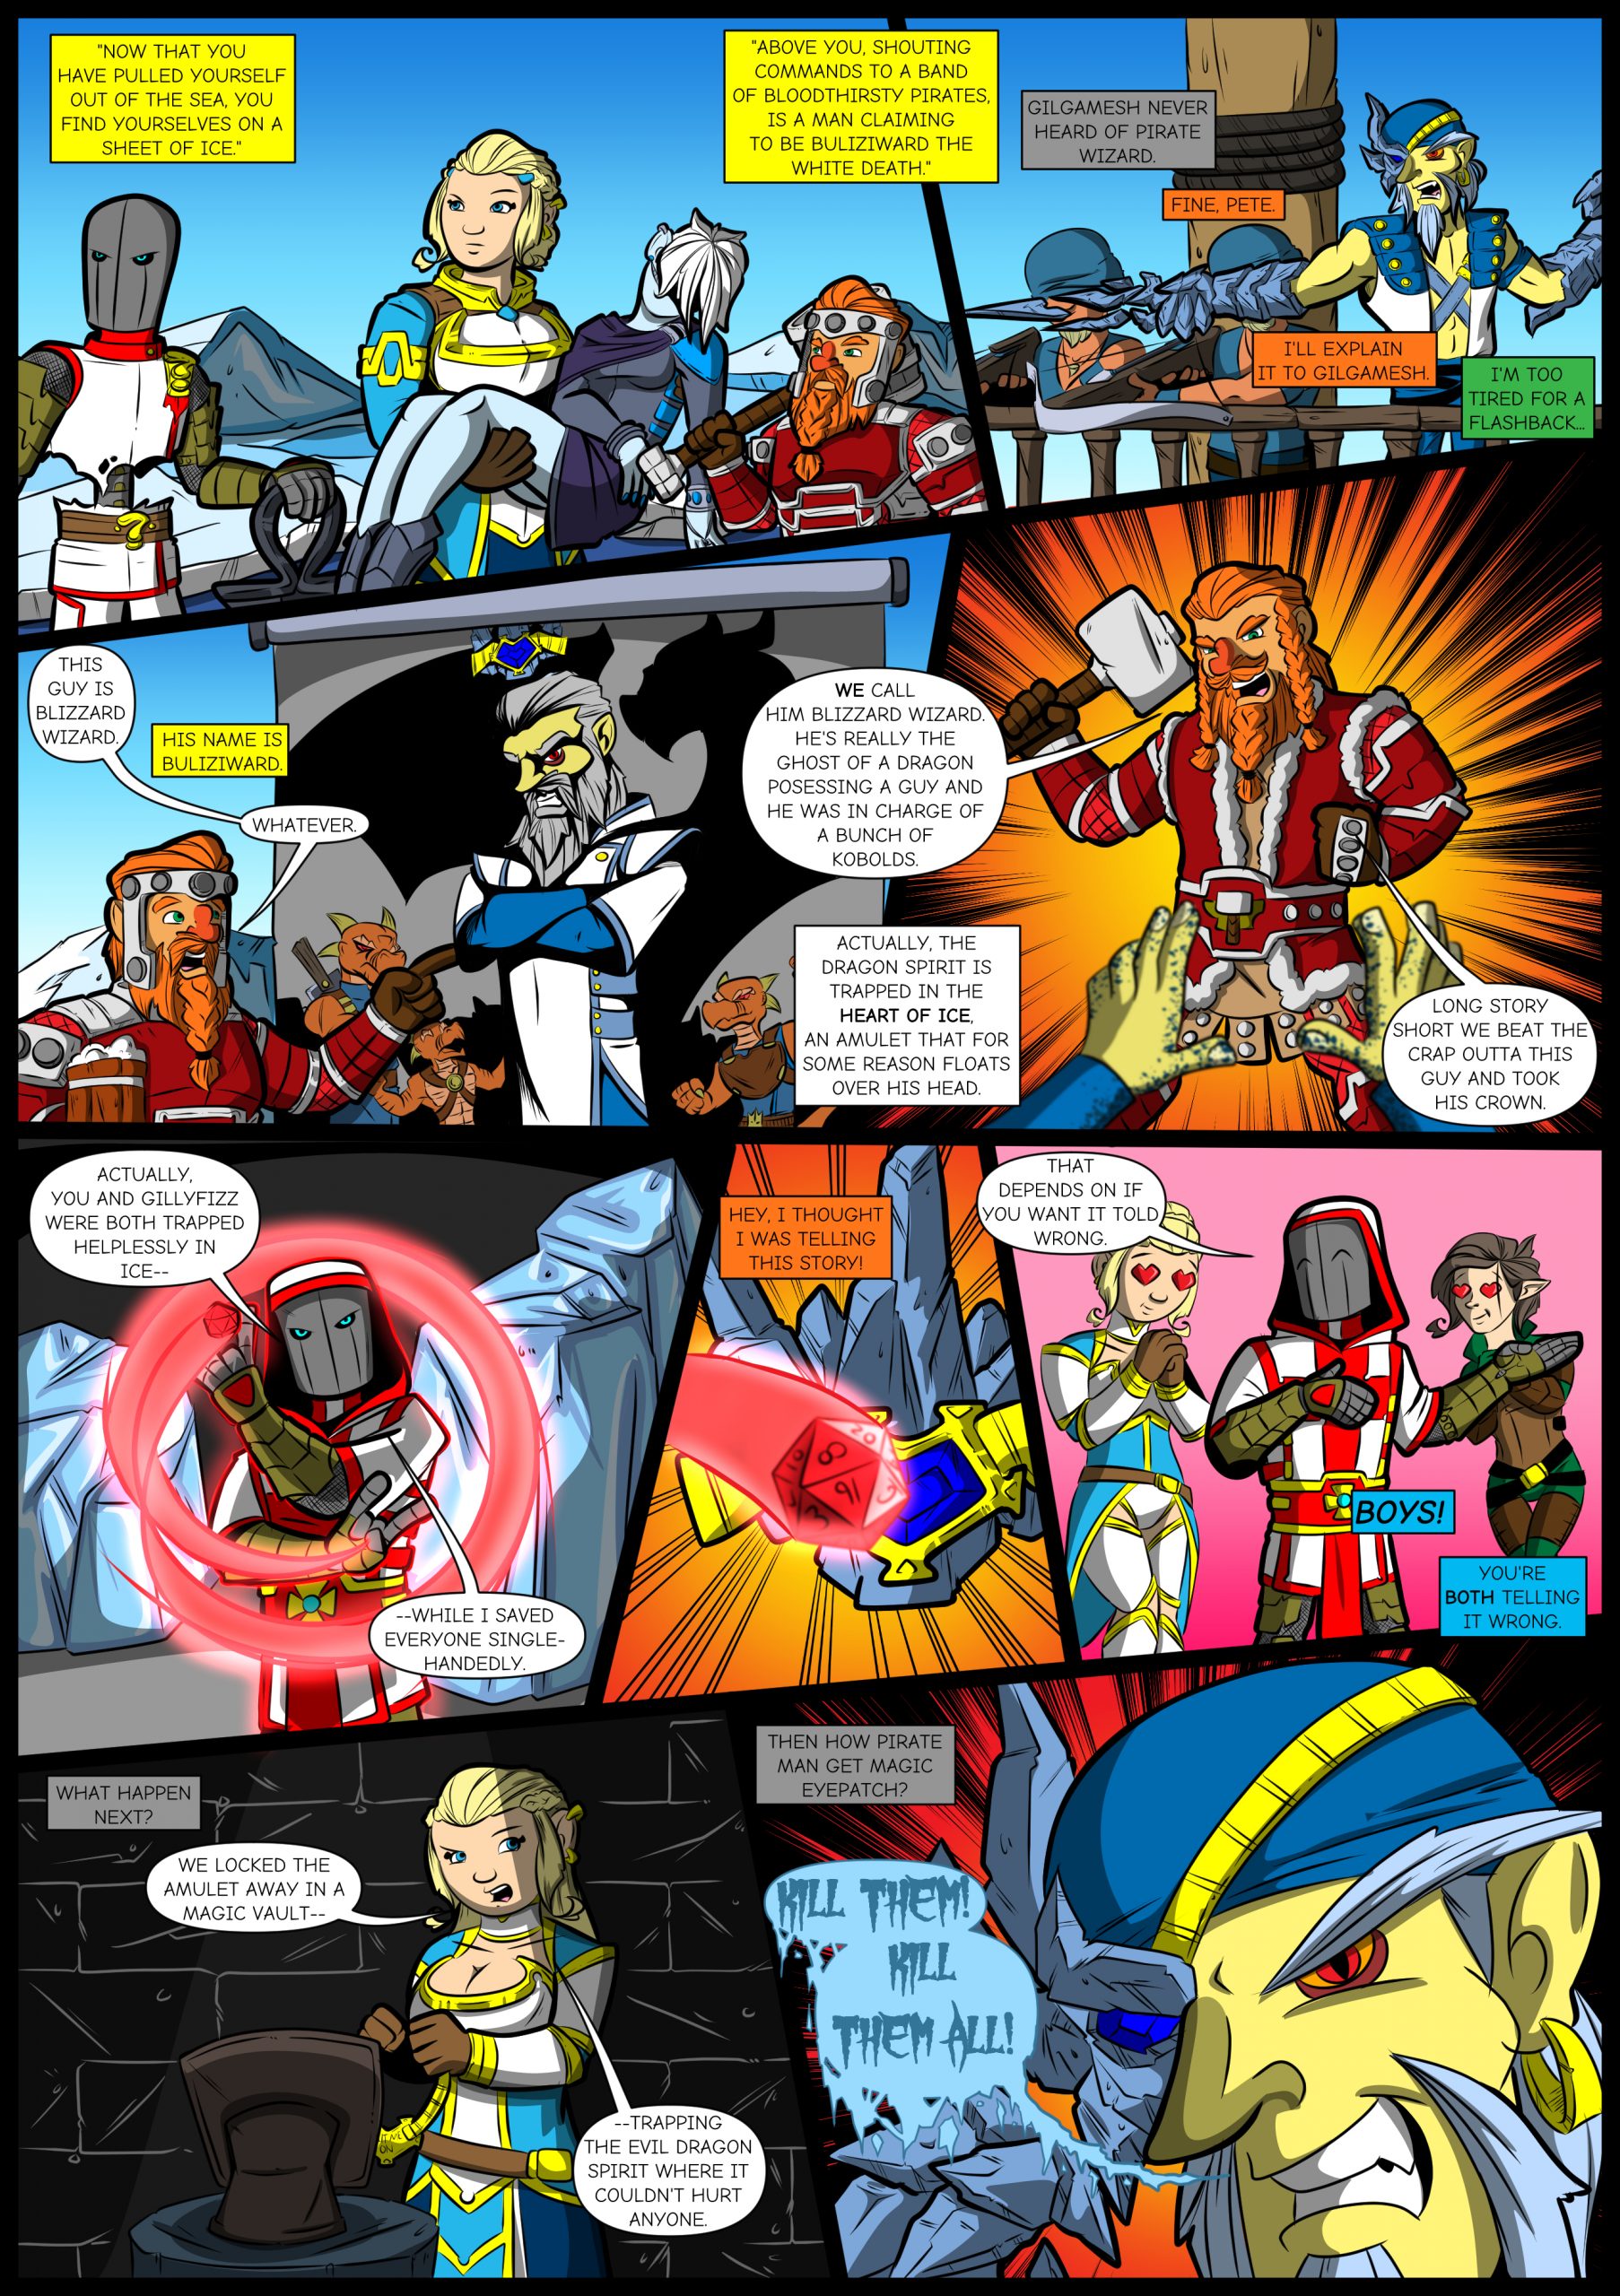 Chapter 4: Issue 14 – Page 1